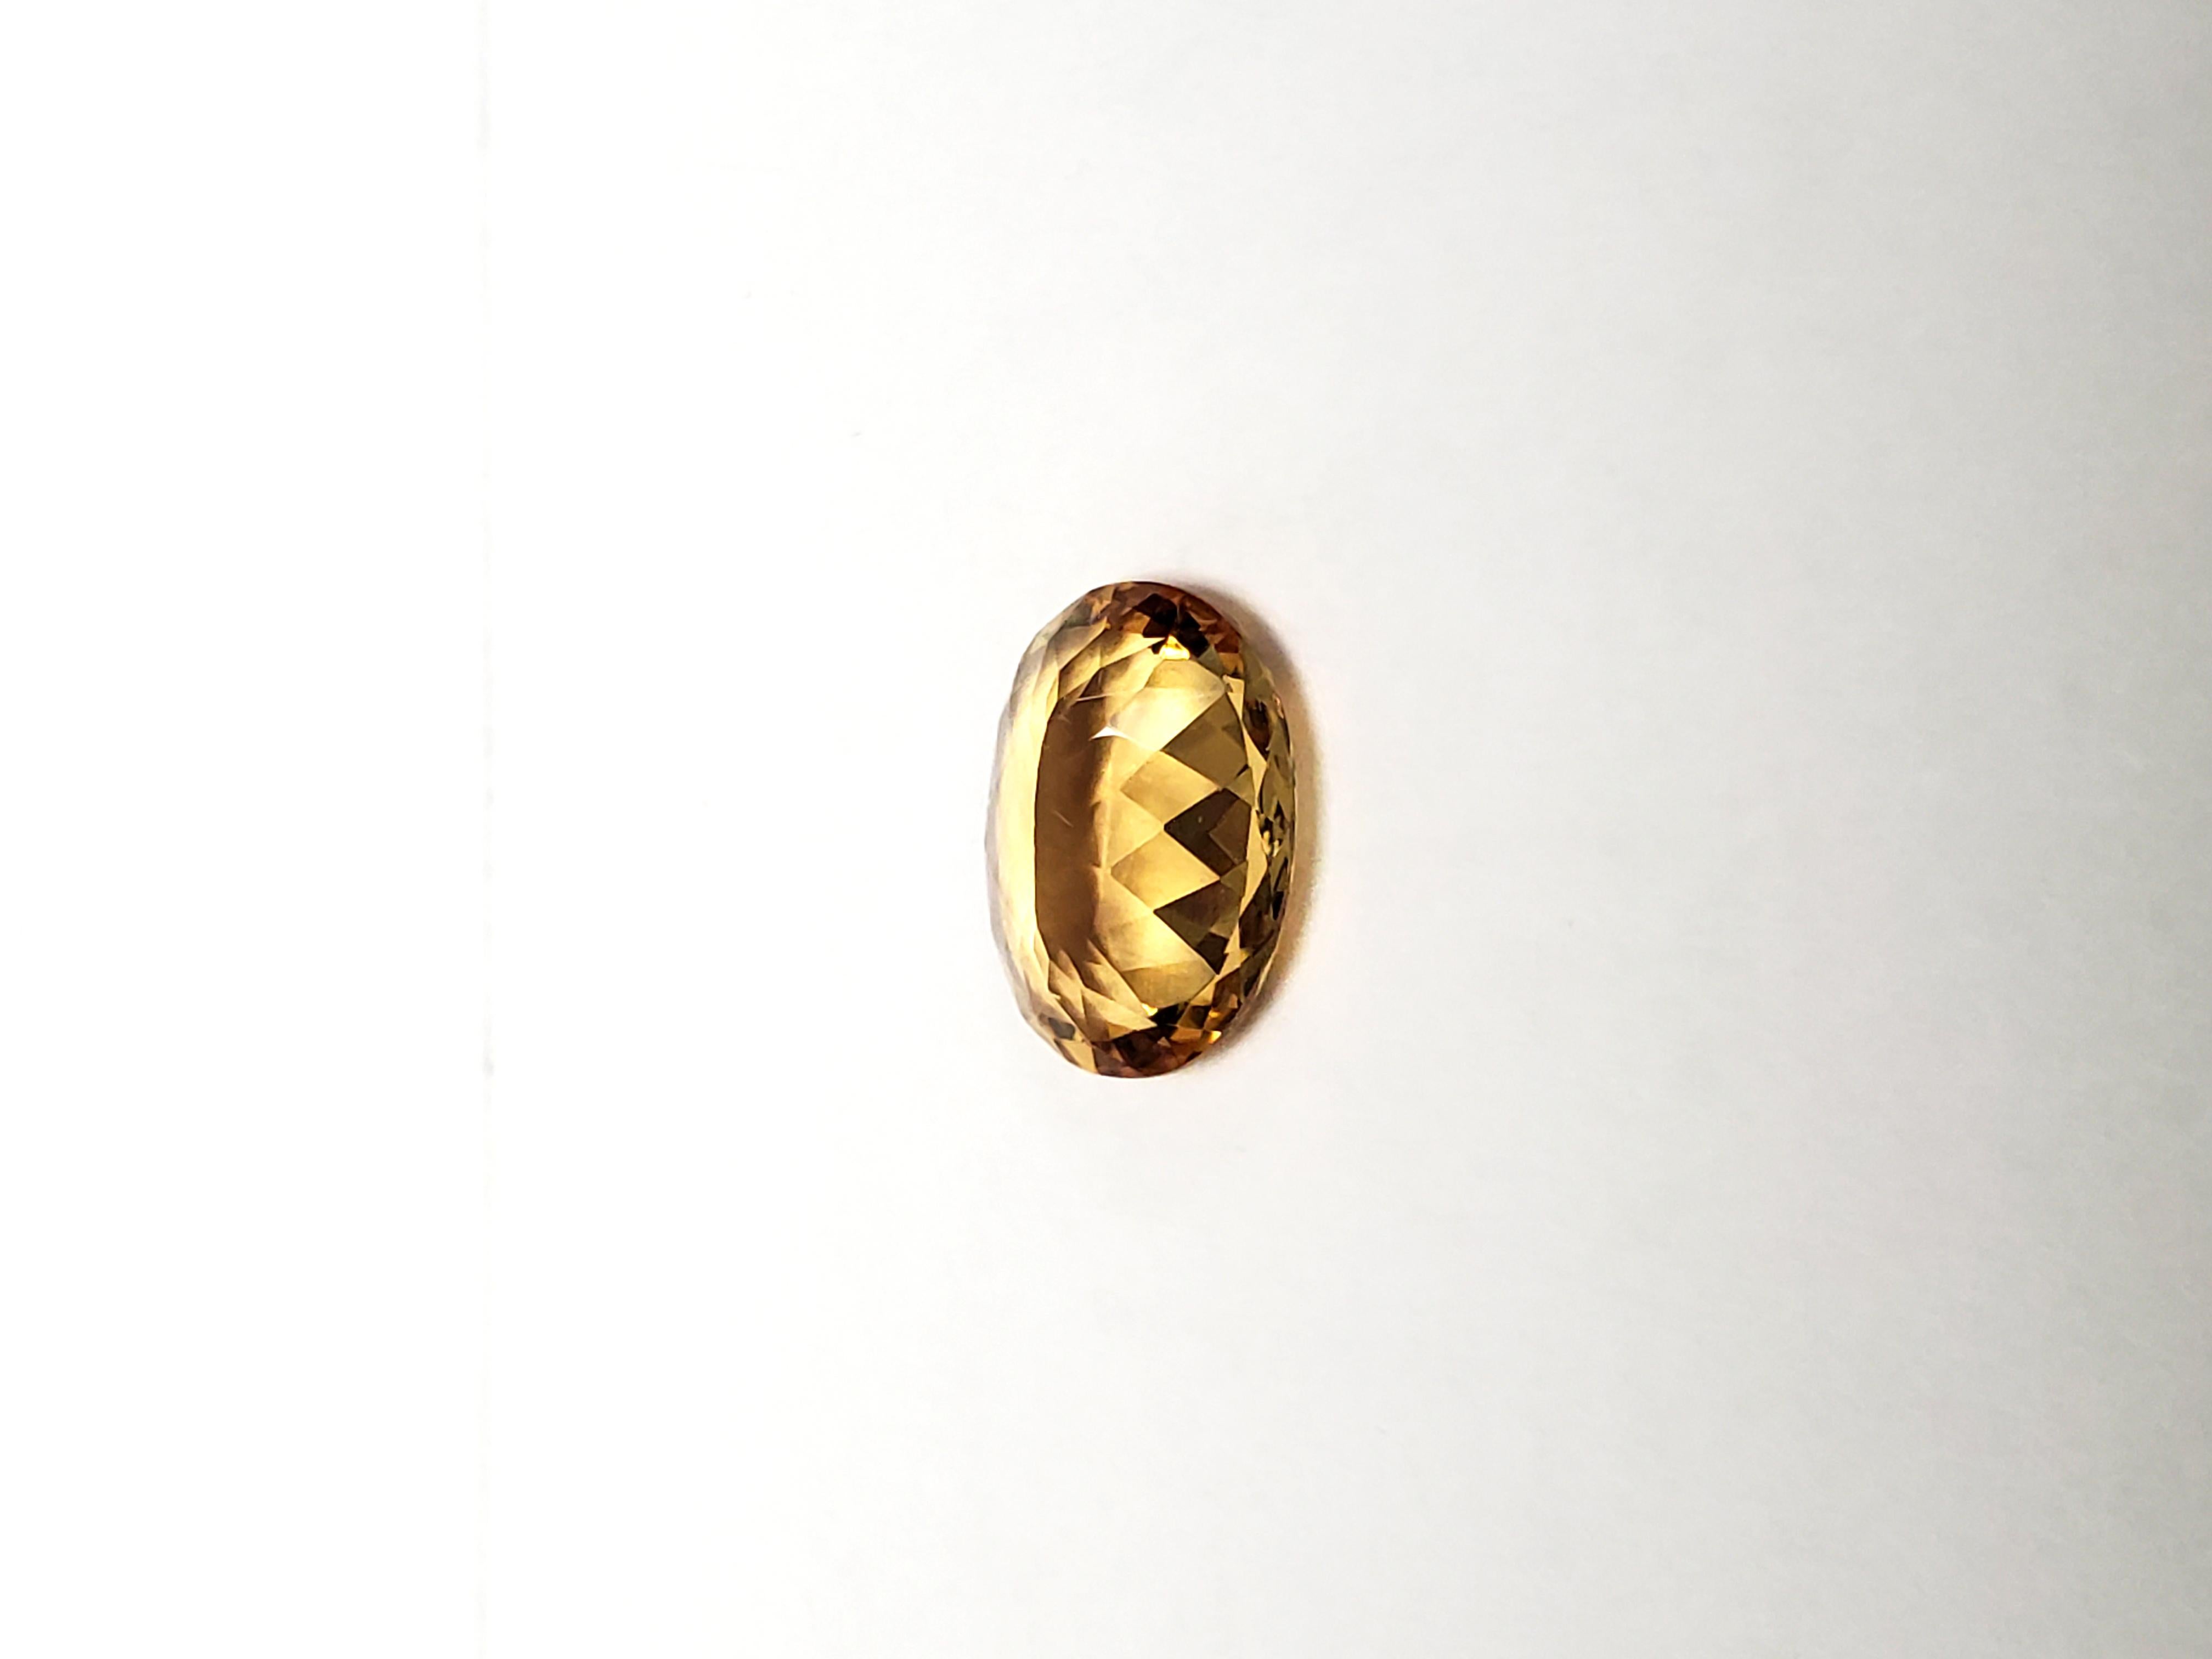 Oval Cut Yellow Topaz with Golden Hints, 2.93ct Oval - Brilliant! For Sale